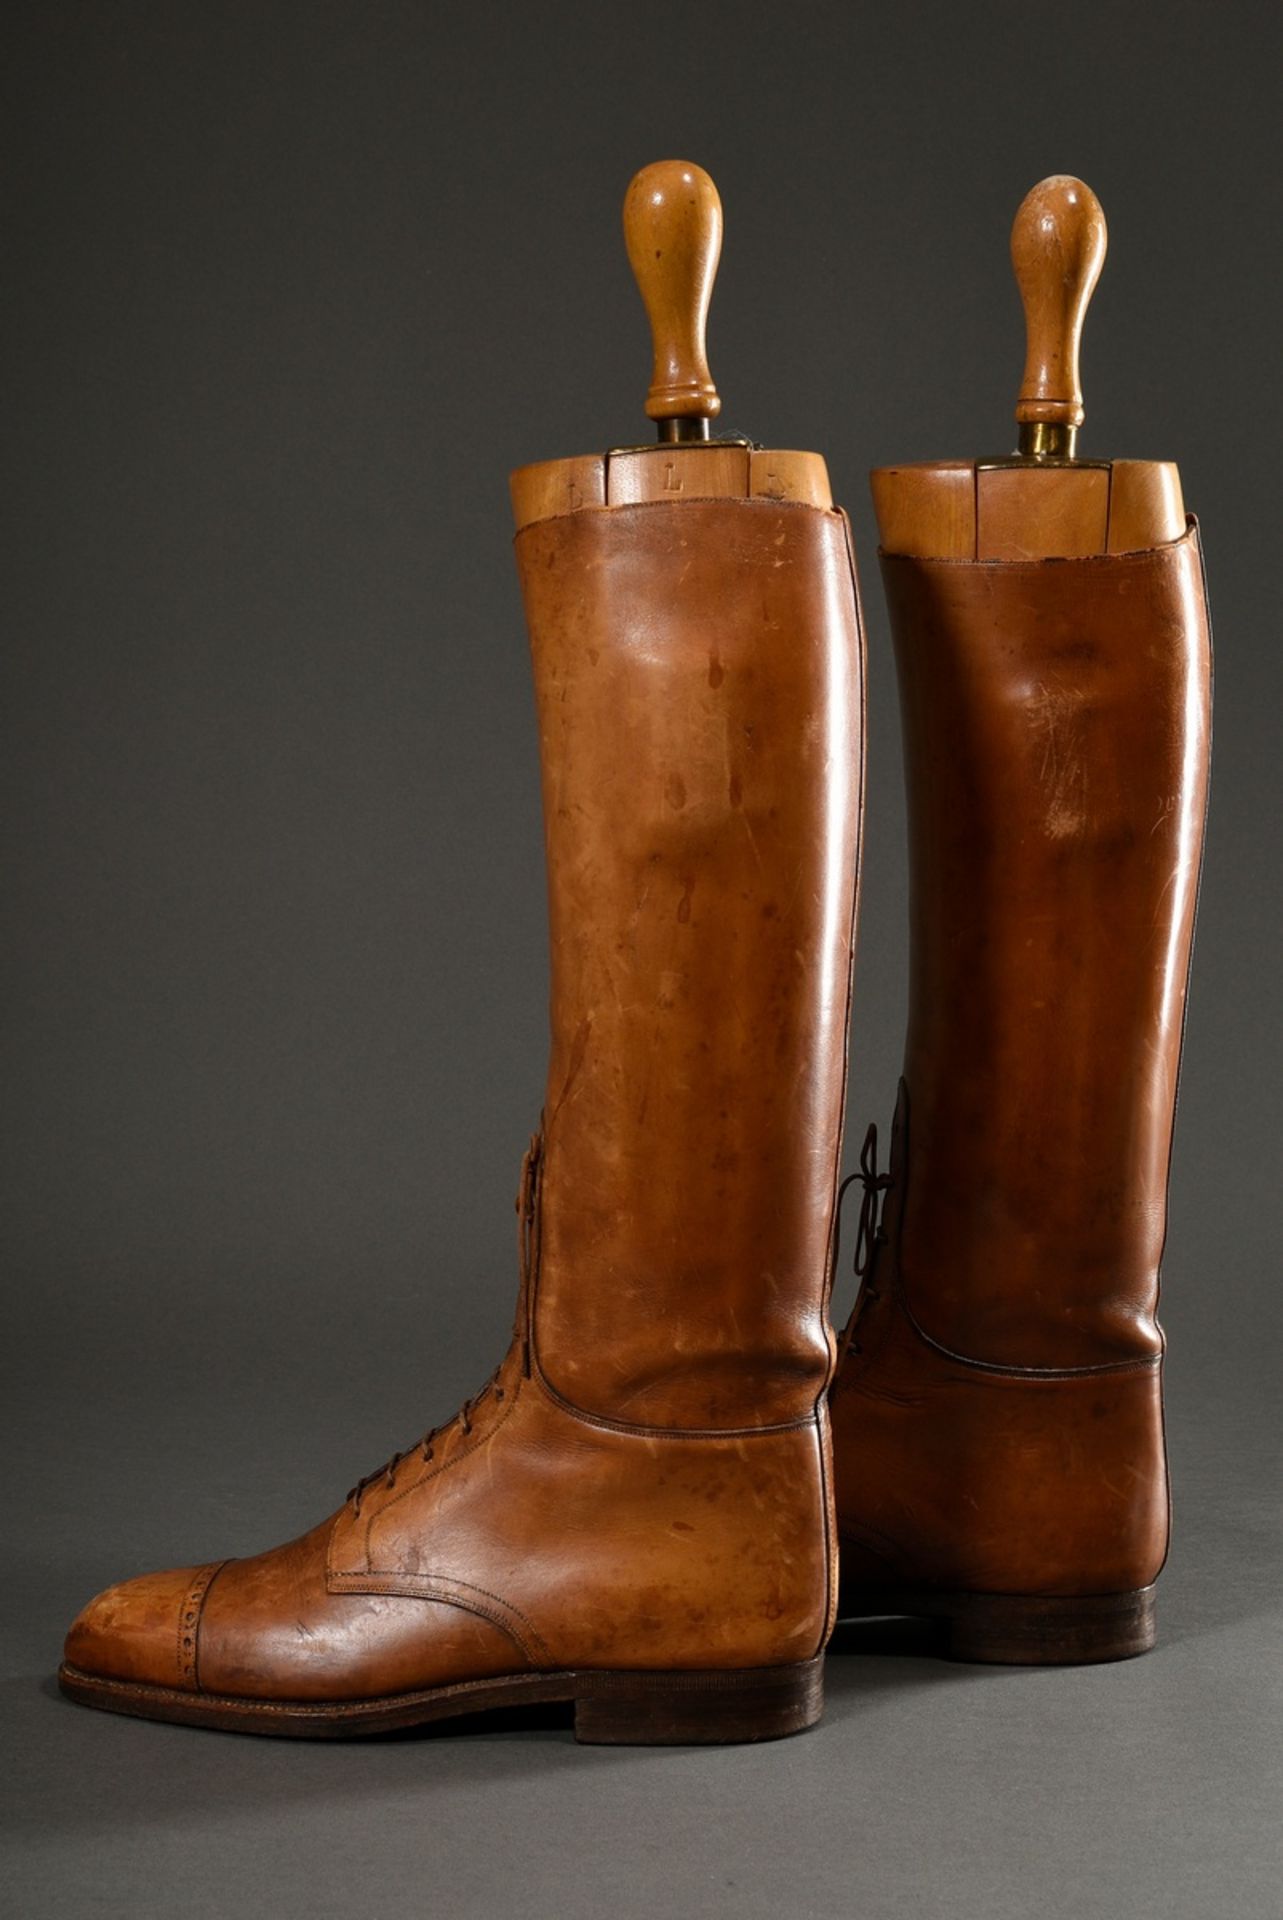 Pair of Edwardian polo boots "James Moore" with lacing and hole pattern, with inserted boot stretch - Image 6 of 8